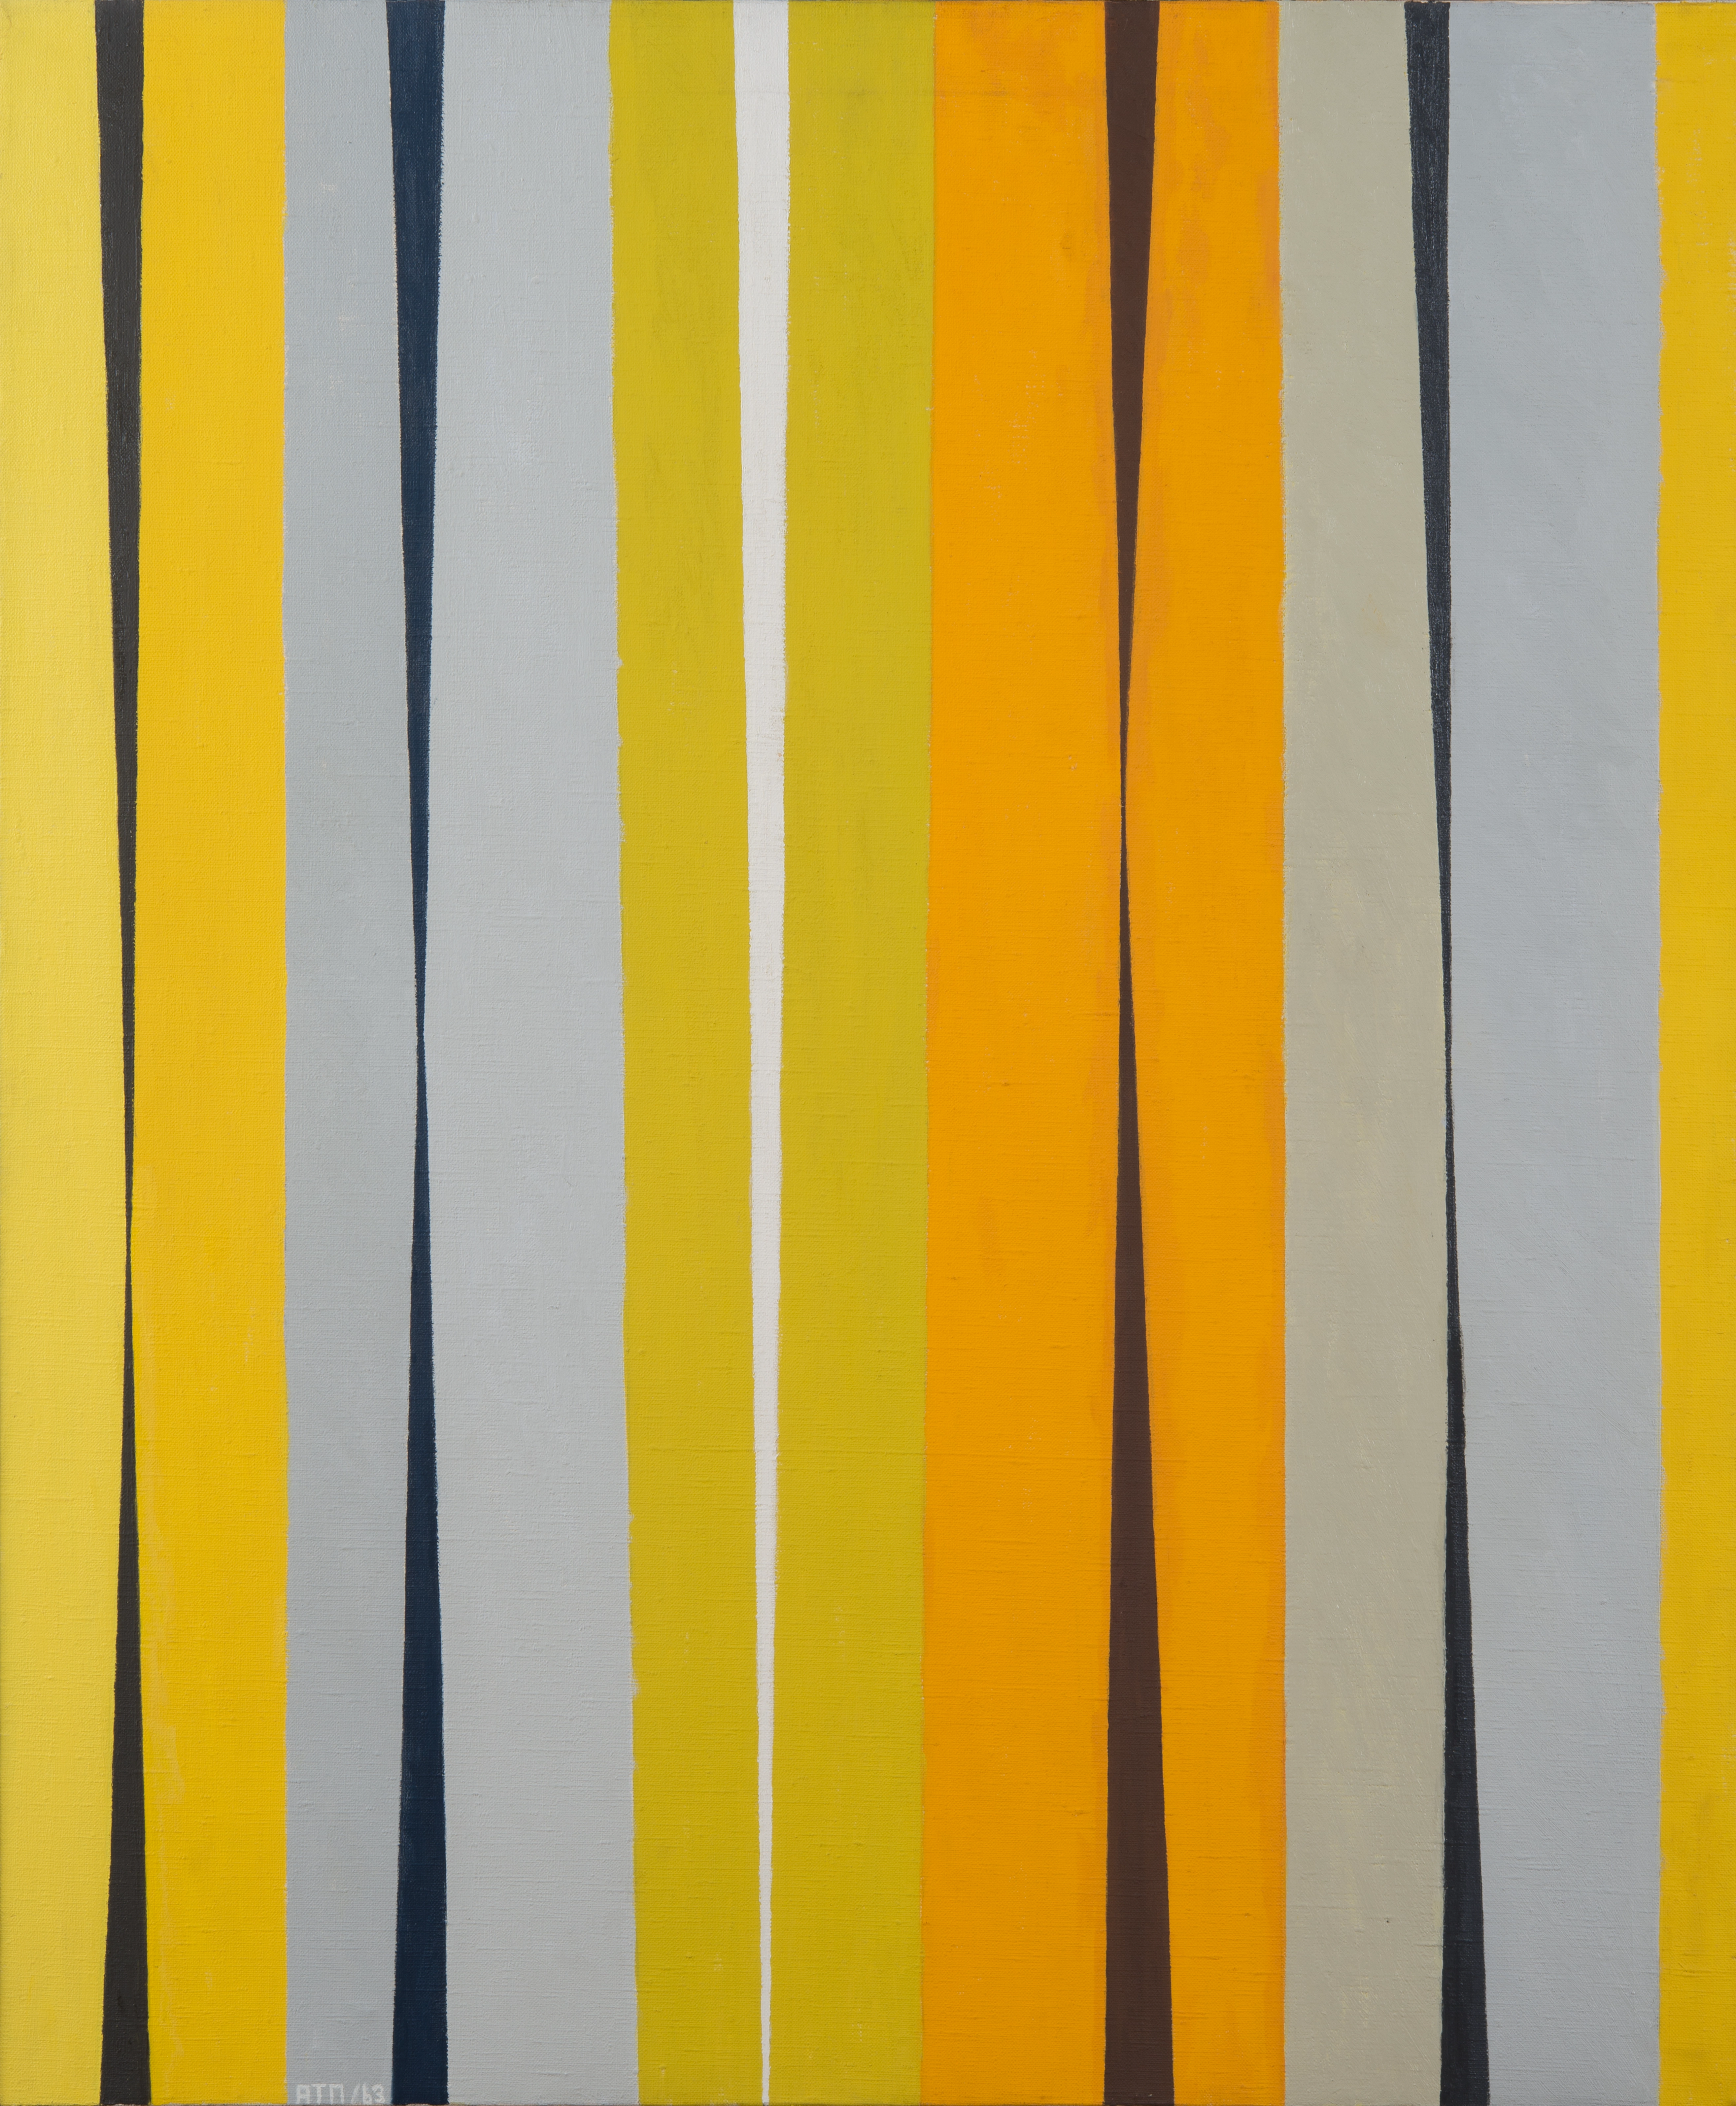 Abstract oil on canvas painting, comprised of yellow, orange, and grey/blue grey vertical stripes, with thin black lines between them. One thin white lines appears between the blocks of color near the center of the composition.